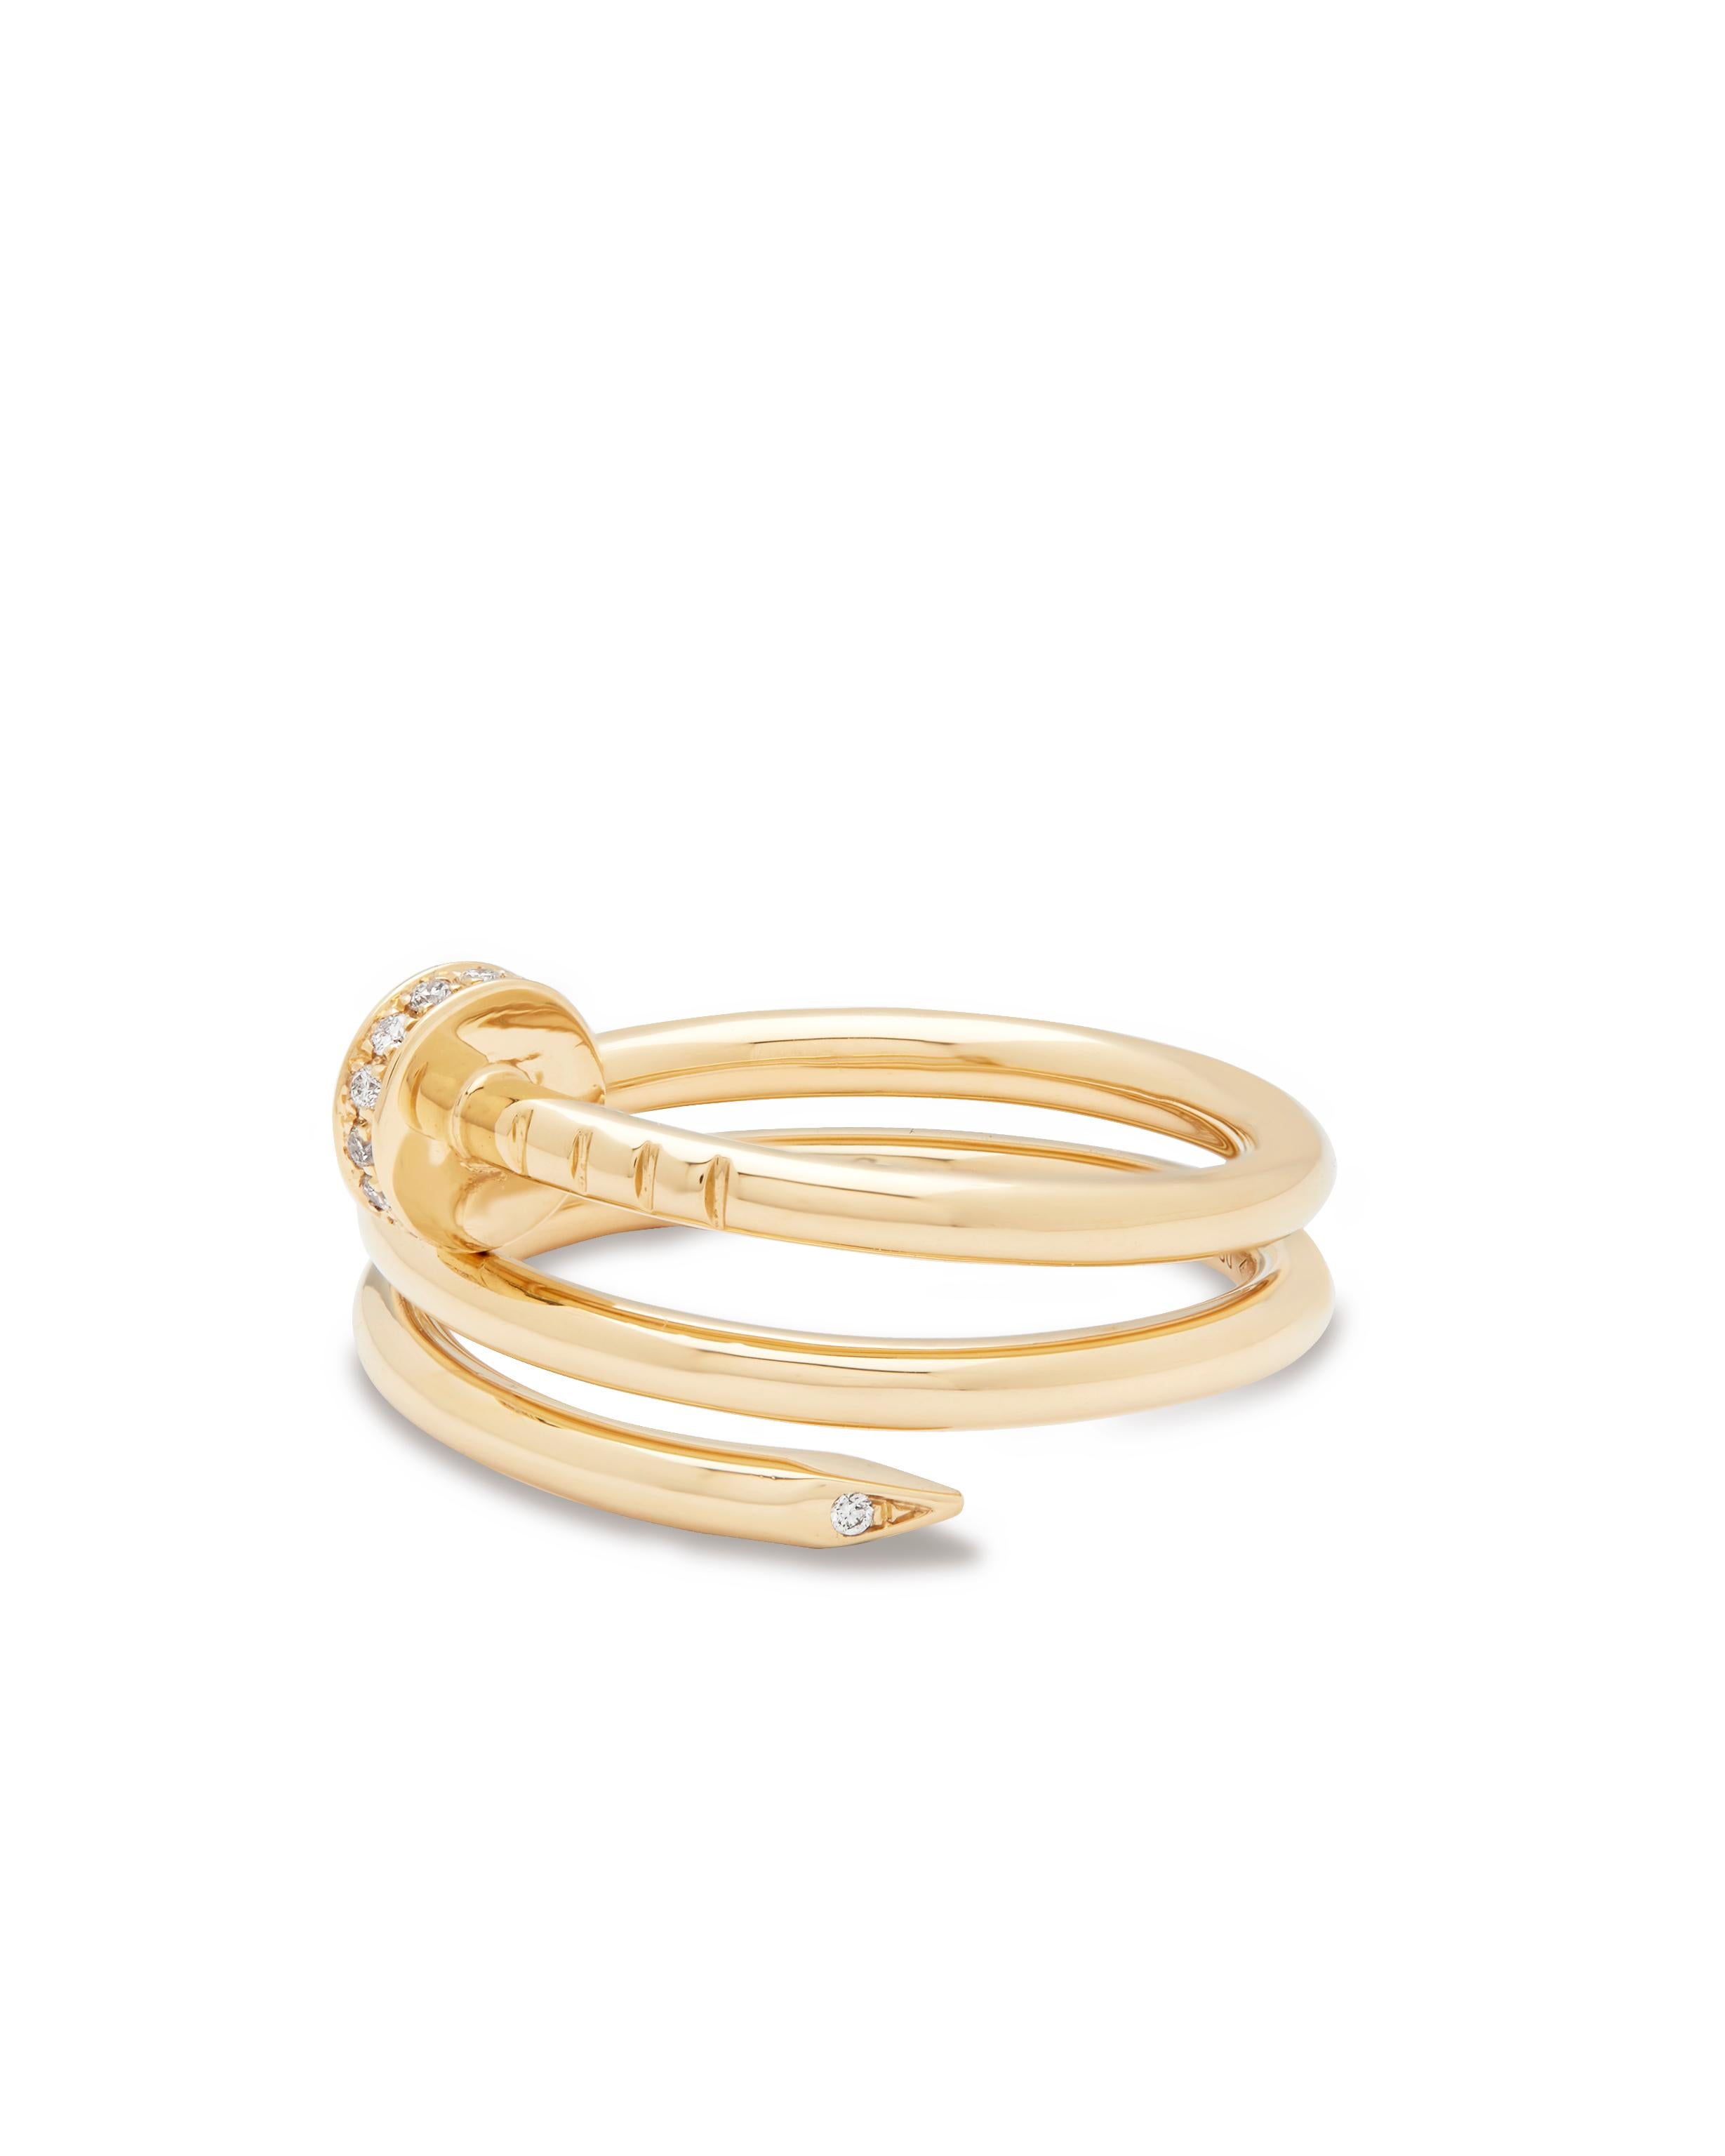 Cartier Juste Un Clou diamond ring model number B4211854

One of Cartier iconic pieces, Juste Un Clou transforms the simple nail into a contemporary piece of jewellery. 
Set in 18ct yellow gold, set with 14 Diamonds at approx 0.08ct 
Each band